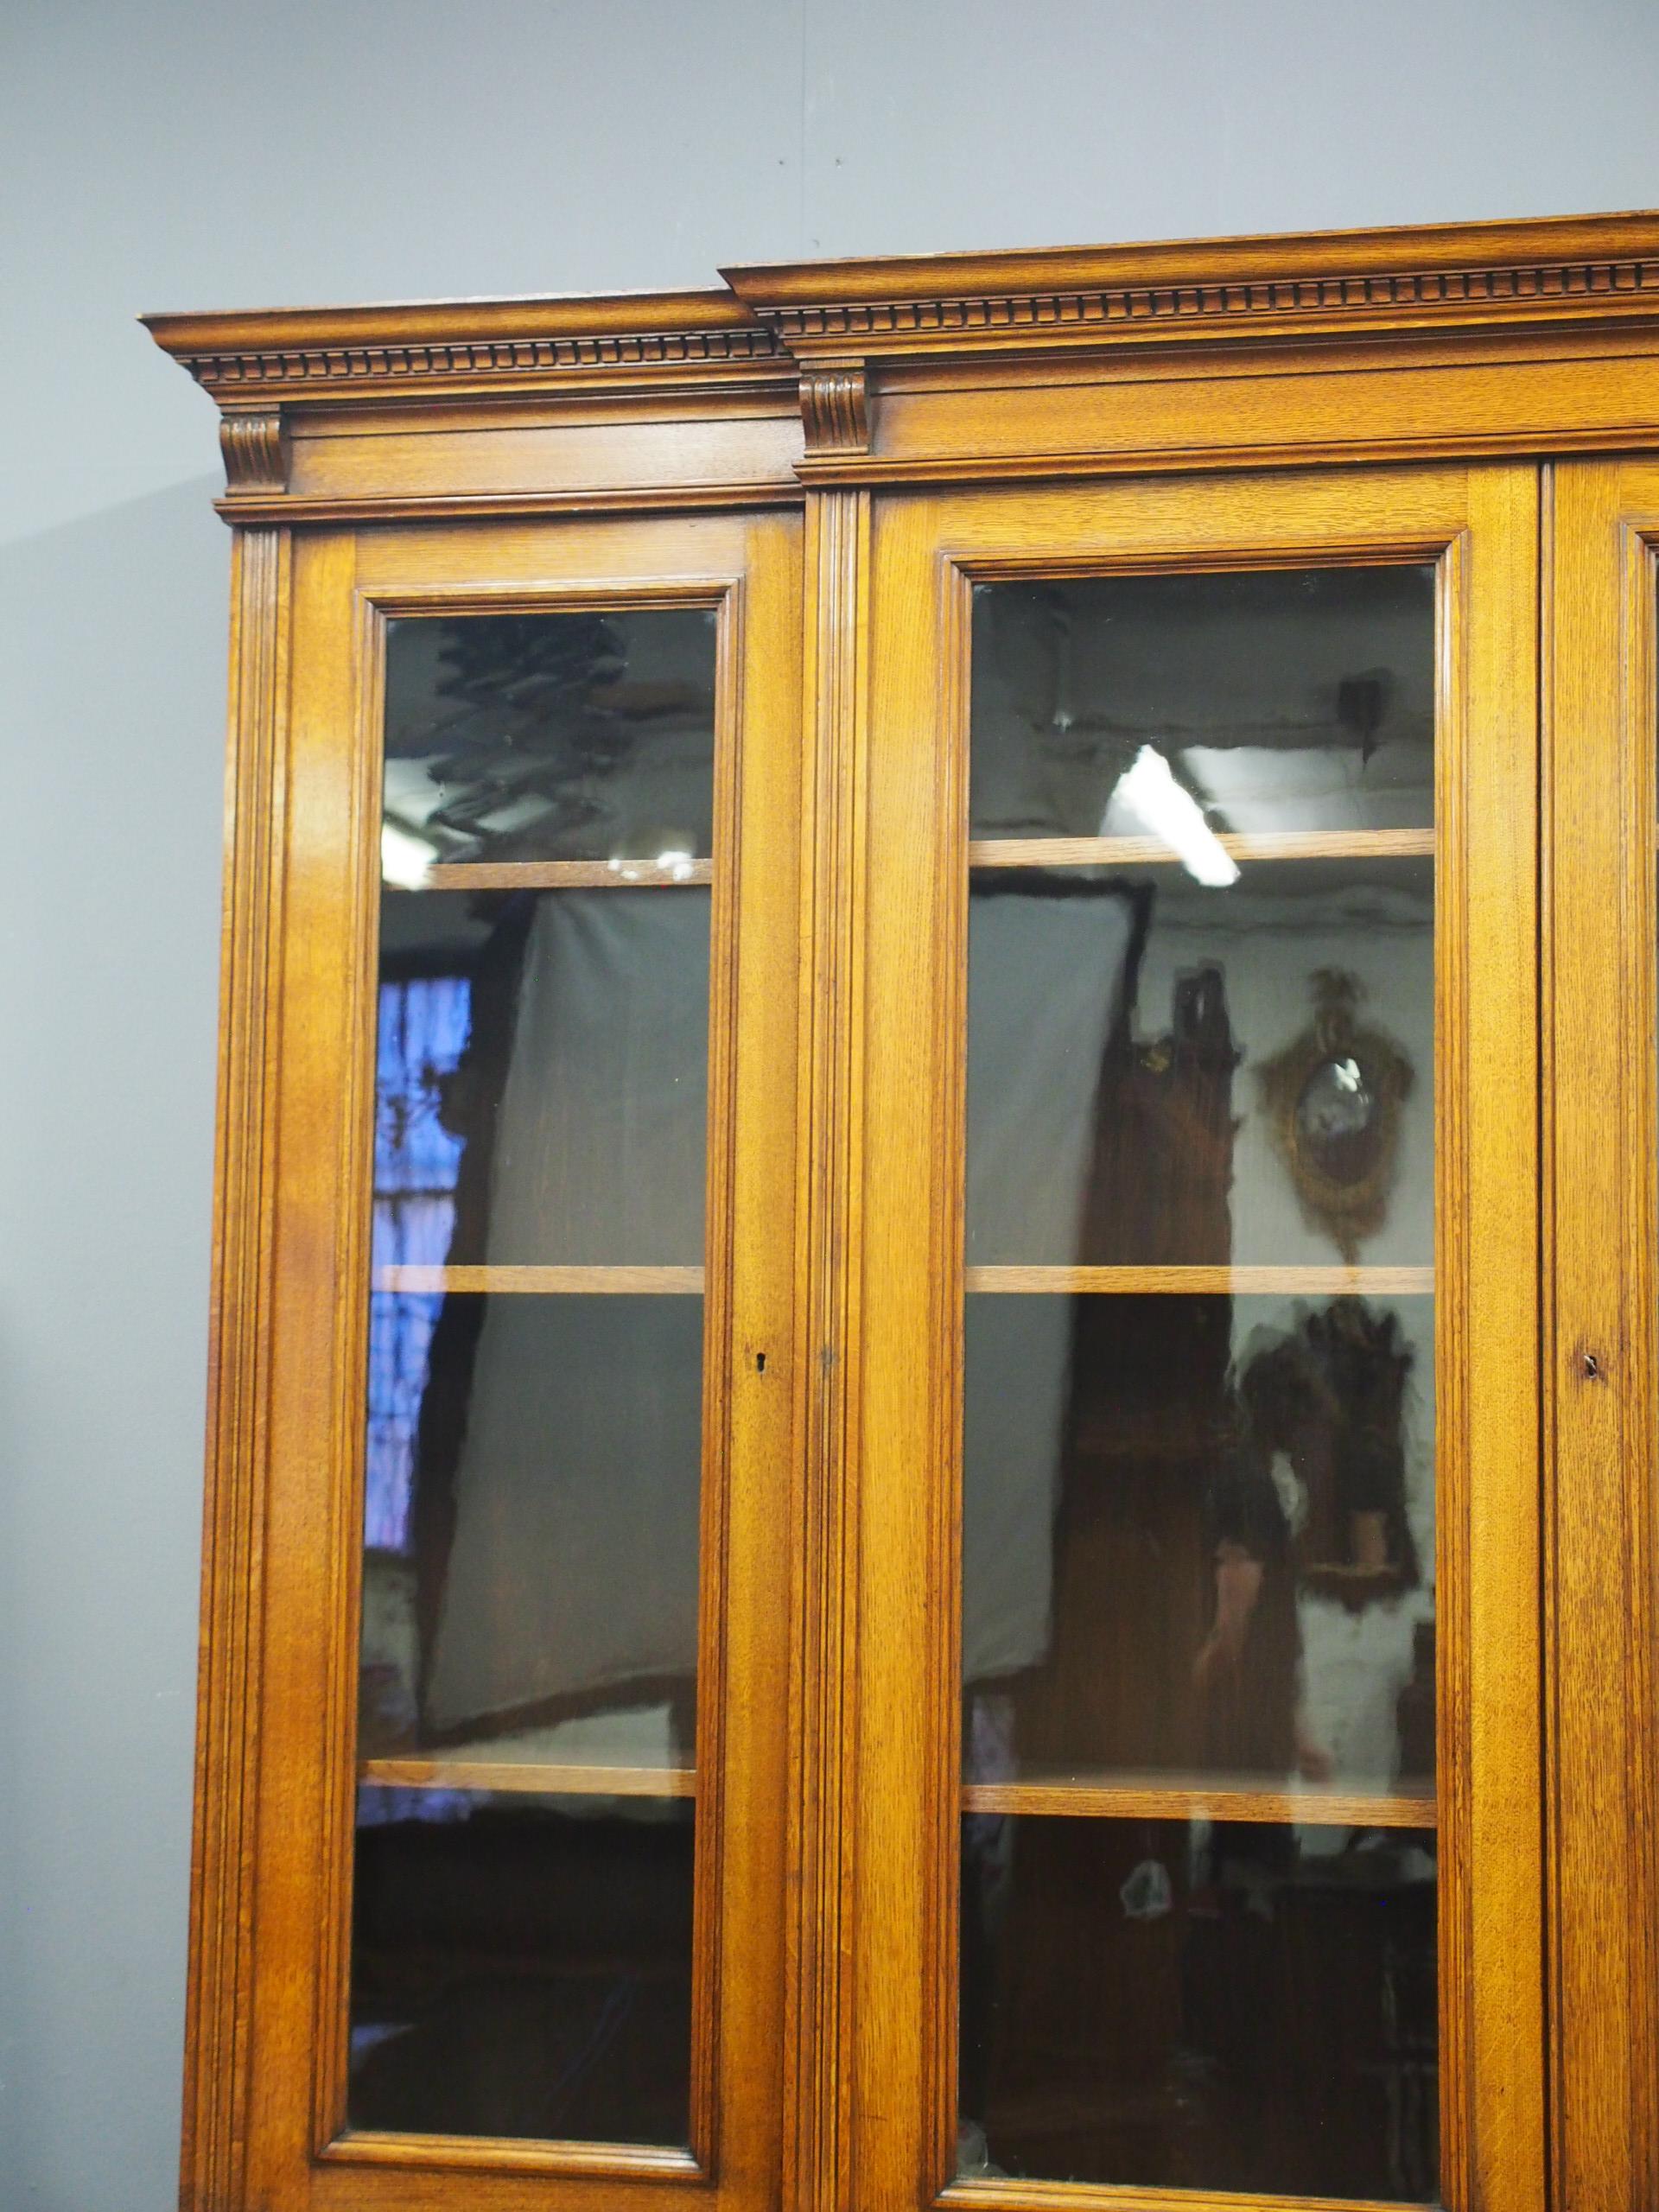 Late Victorian oak 4 door breakfront bookcase, circa 1870. The top has a dentil detailed cornice with stylish moulding, and 4 small corbels beneath. Behind the glazed doors in the top section are 3 polished, adjustable shelves, with solid oak